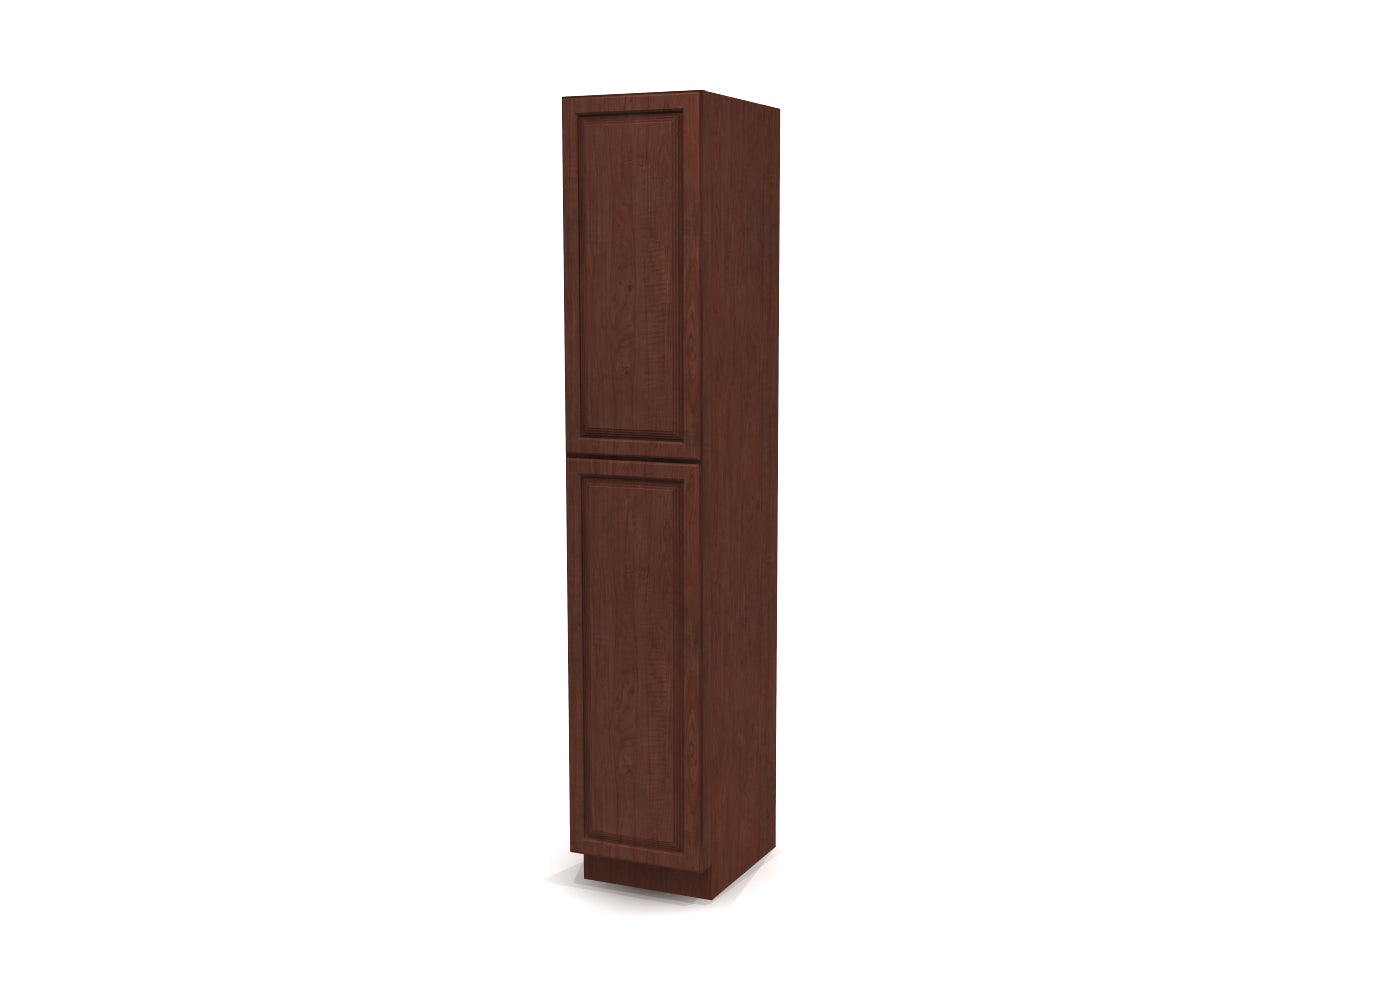 Utility Pantry Single Door 96" by 18" Wide Cherry Raised Panel Cabinet